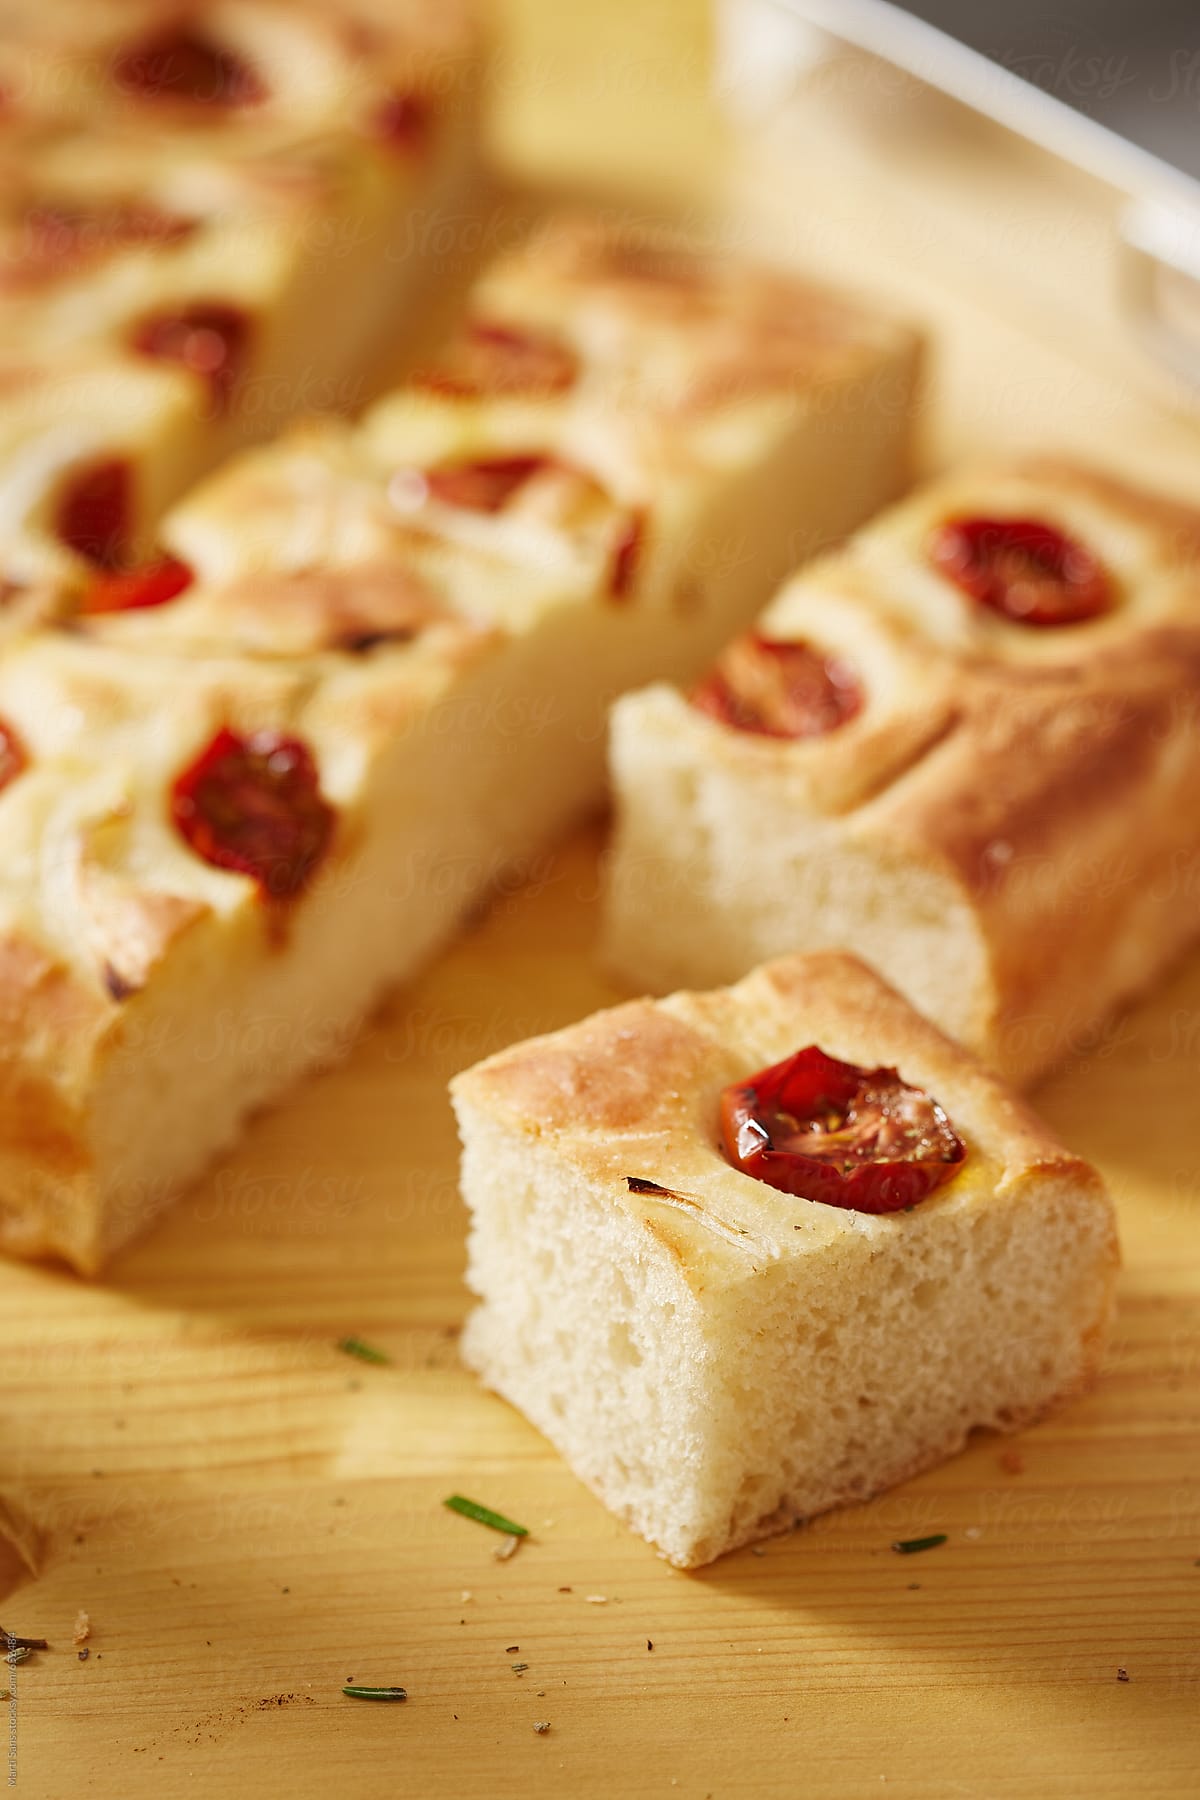 Portions of homemade focaccia with tomatoes